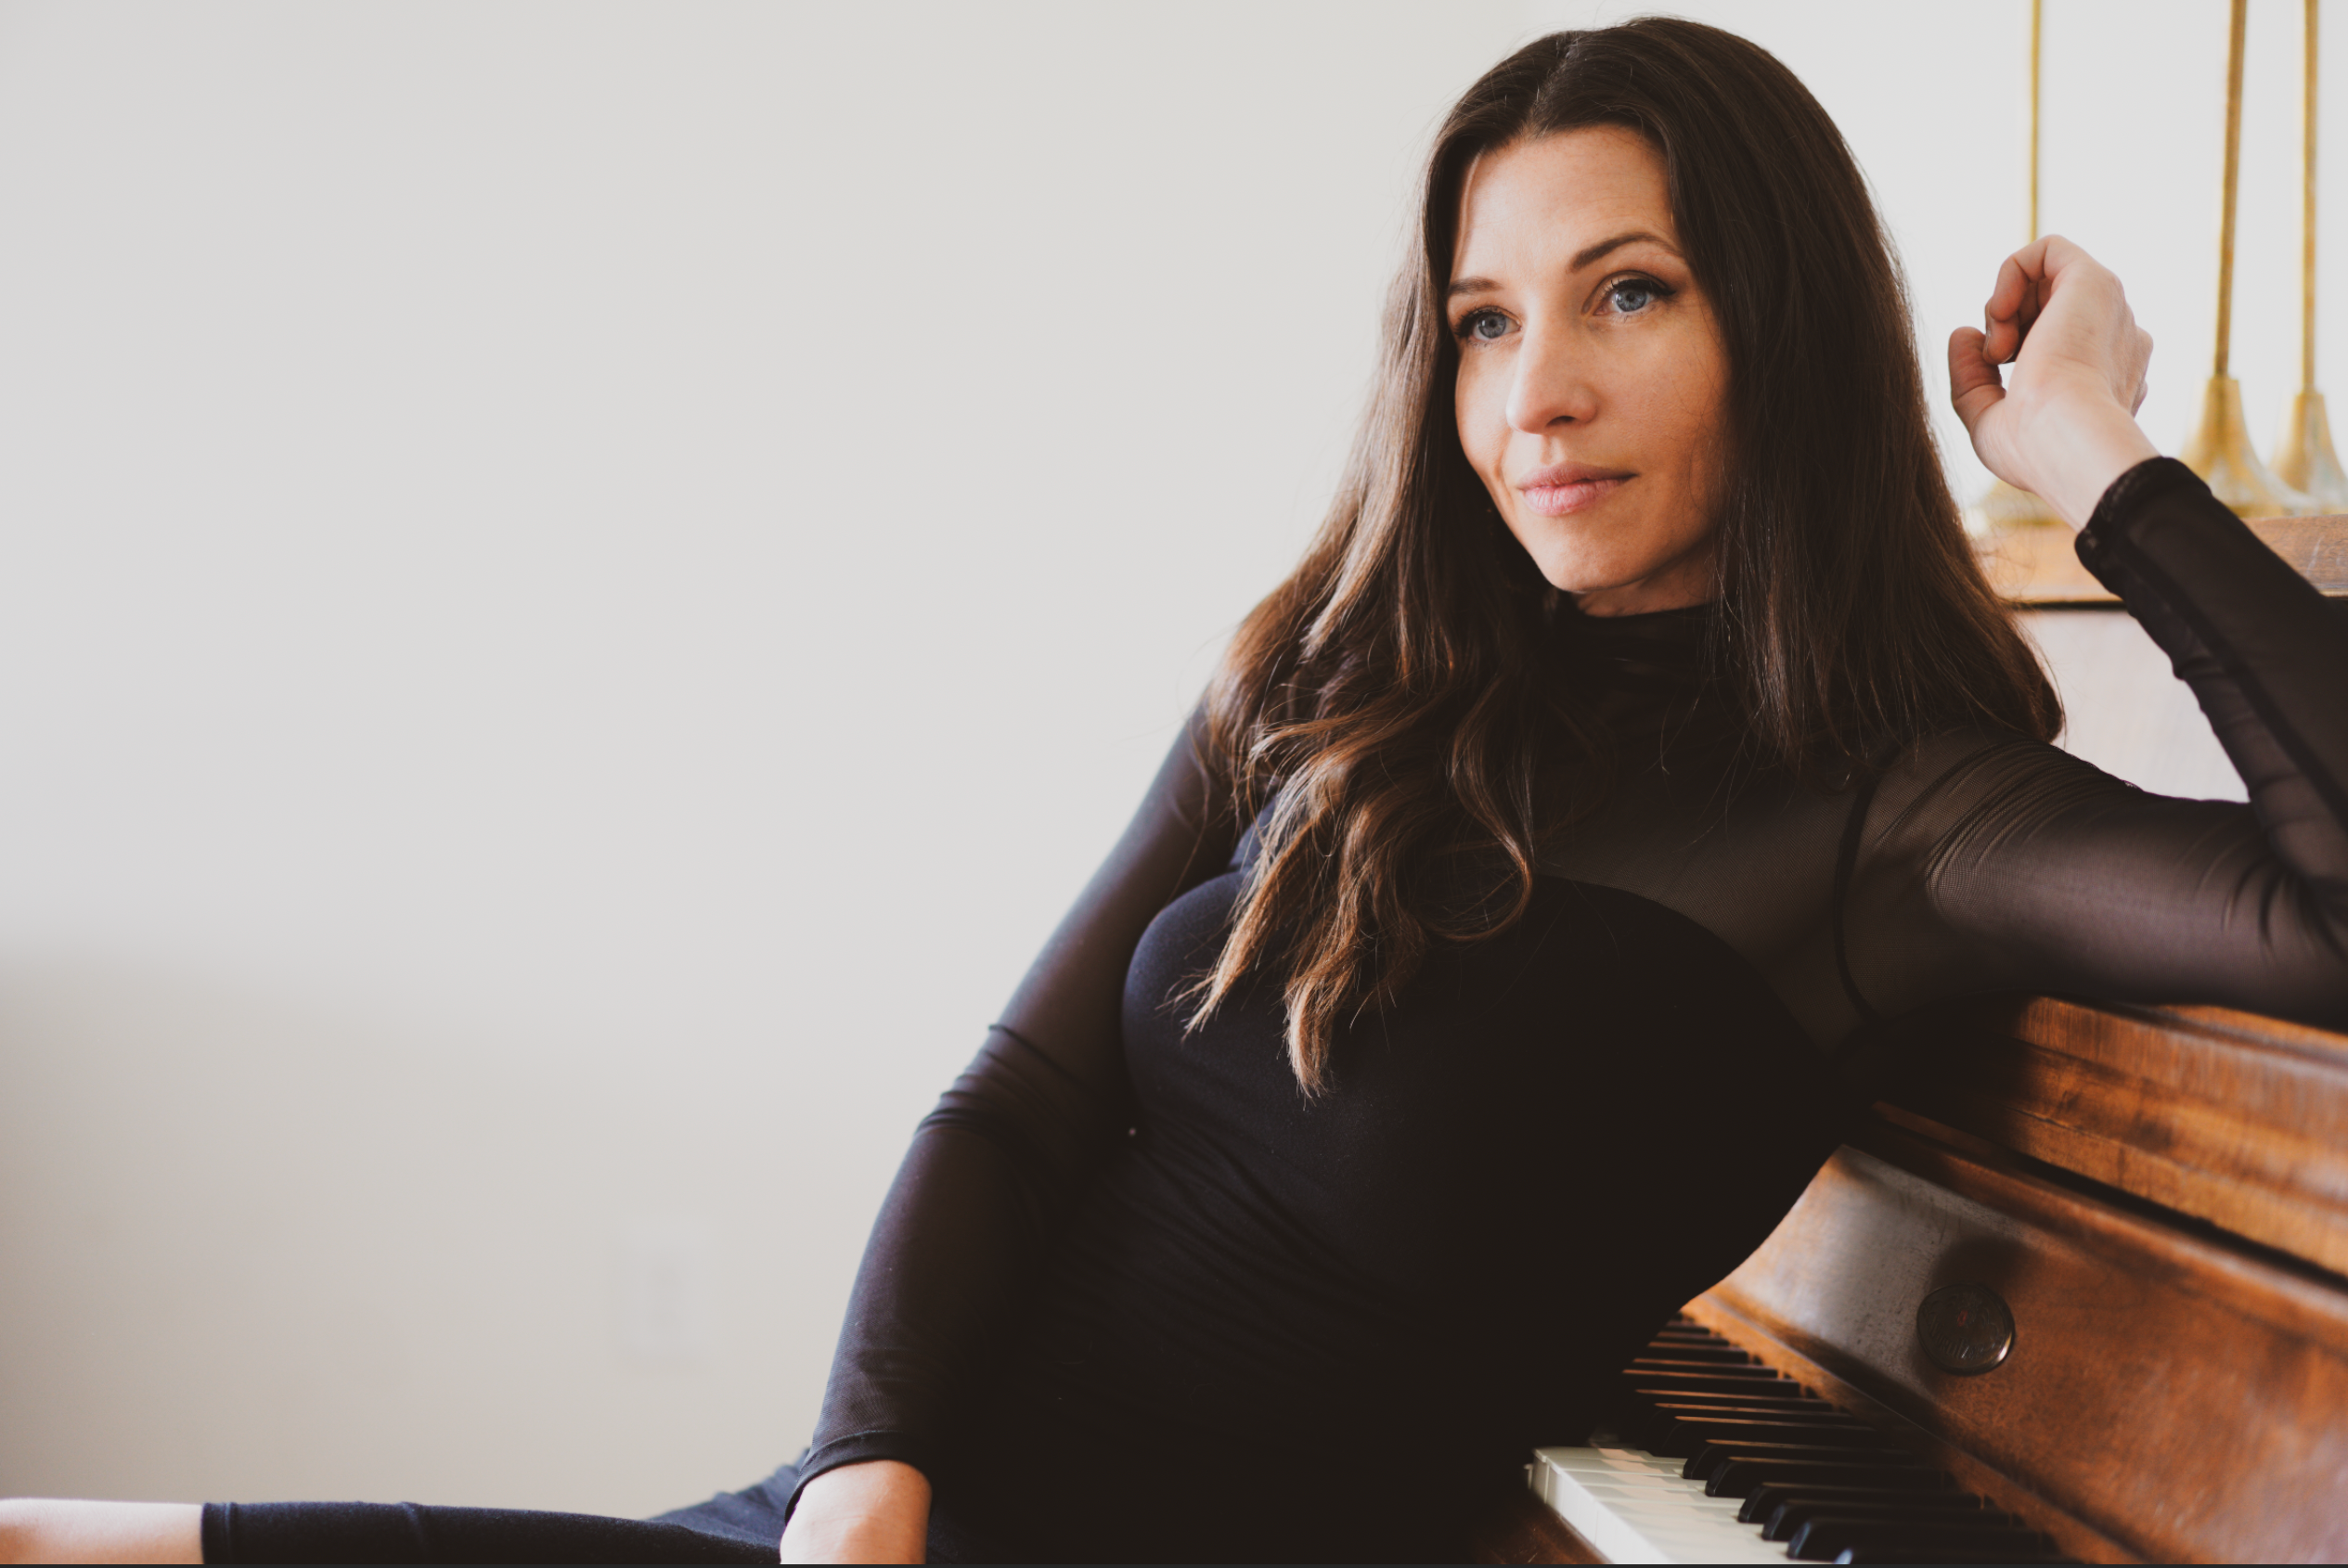 Five Questions with Angela the Pianist